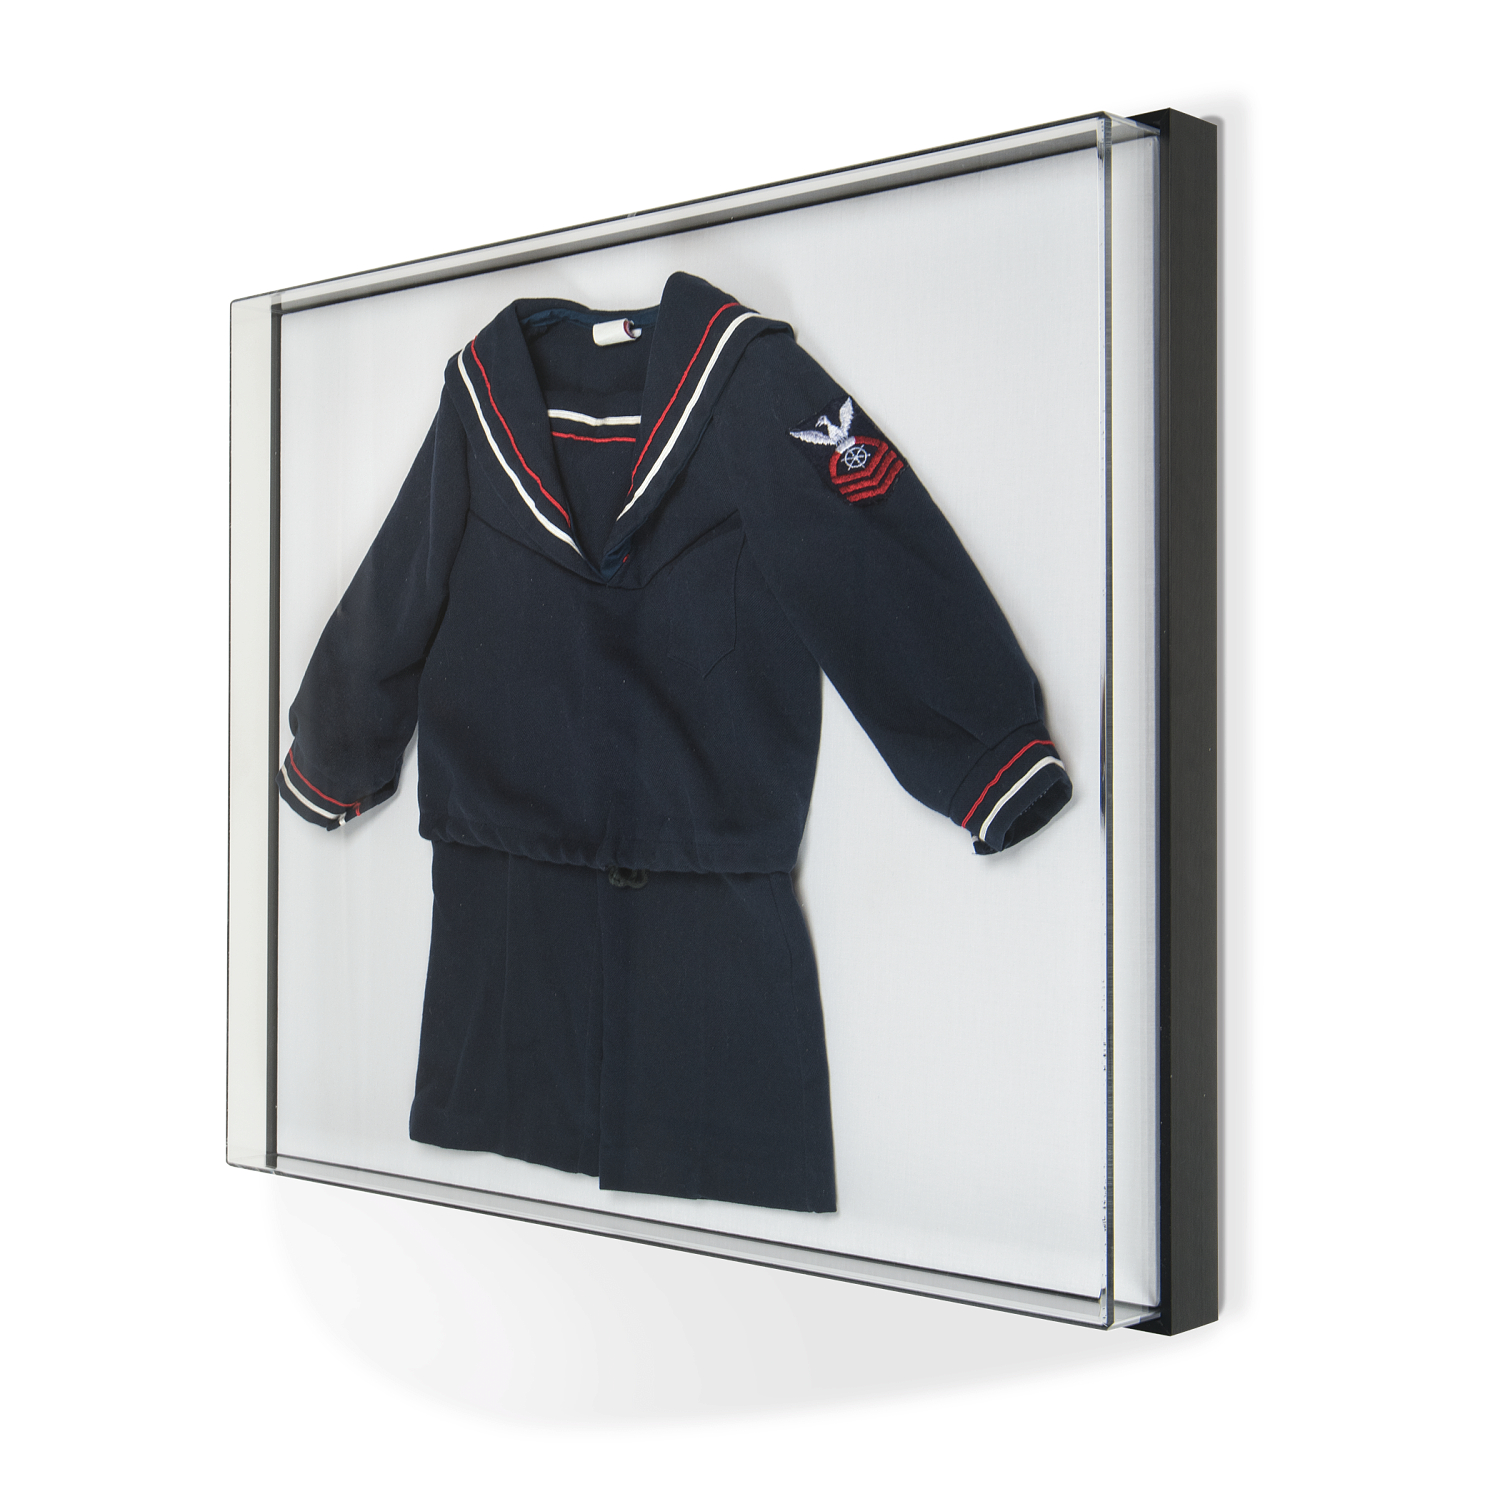 Gaylord Archival® Avant Museum Cases | Wall-Mount | Vitrine | Cases | Exhibit Gaylord Wall-Mount Display & Case Exhibit Archival & Display